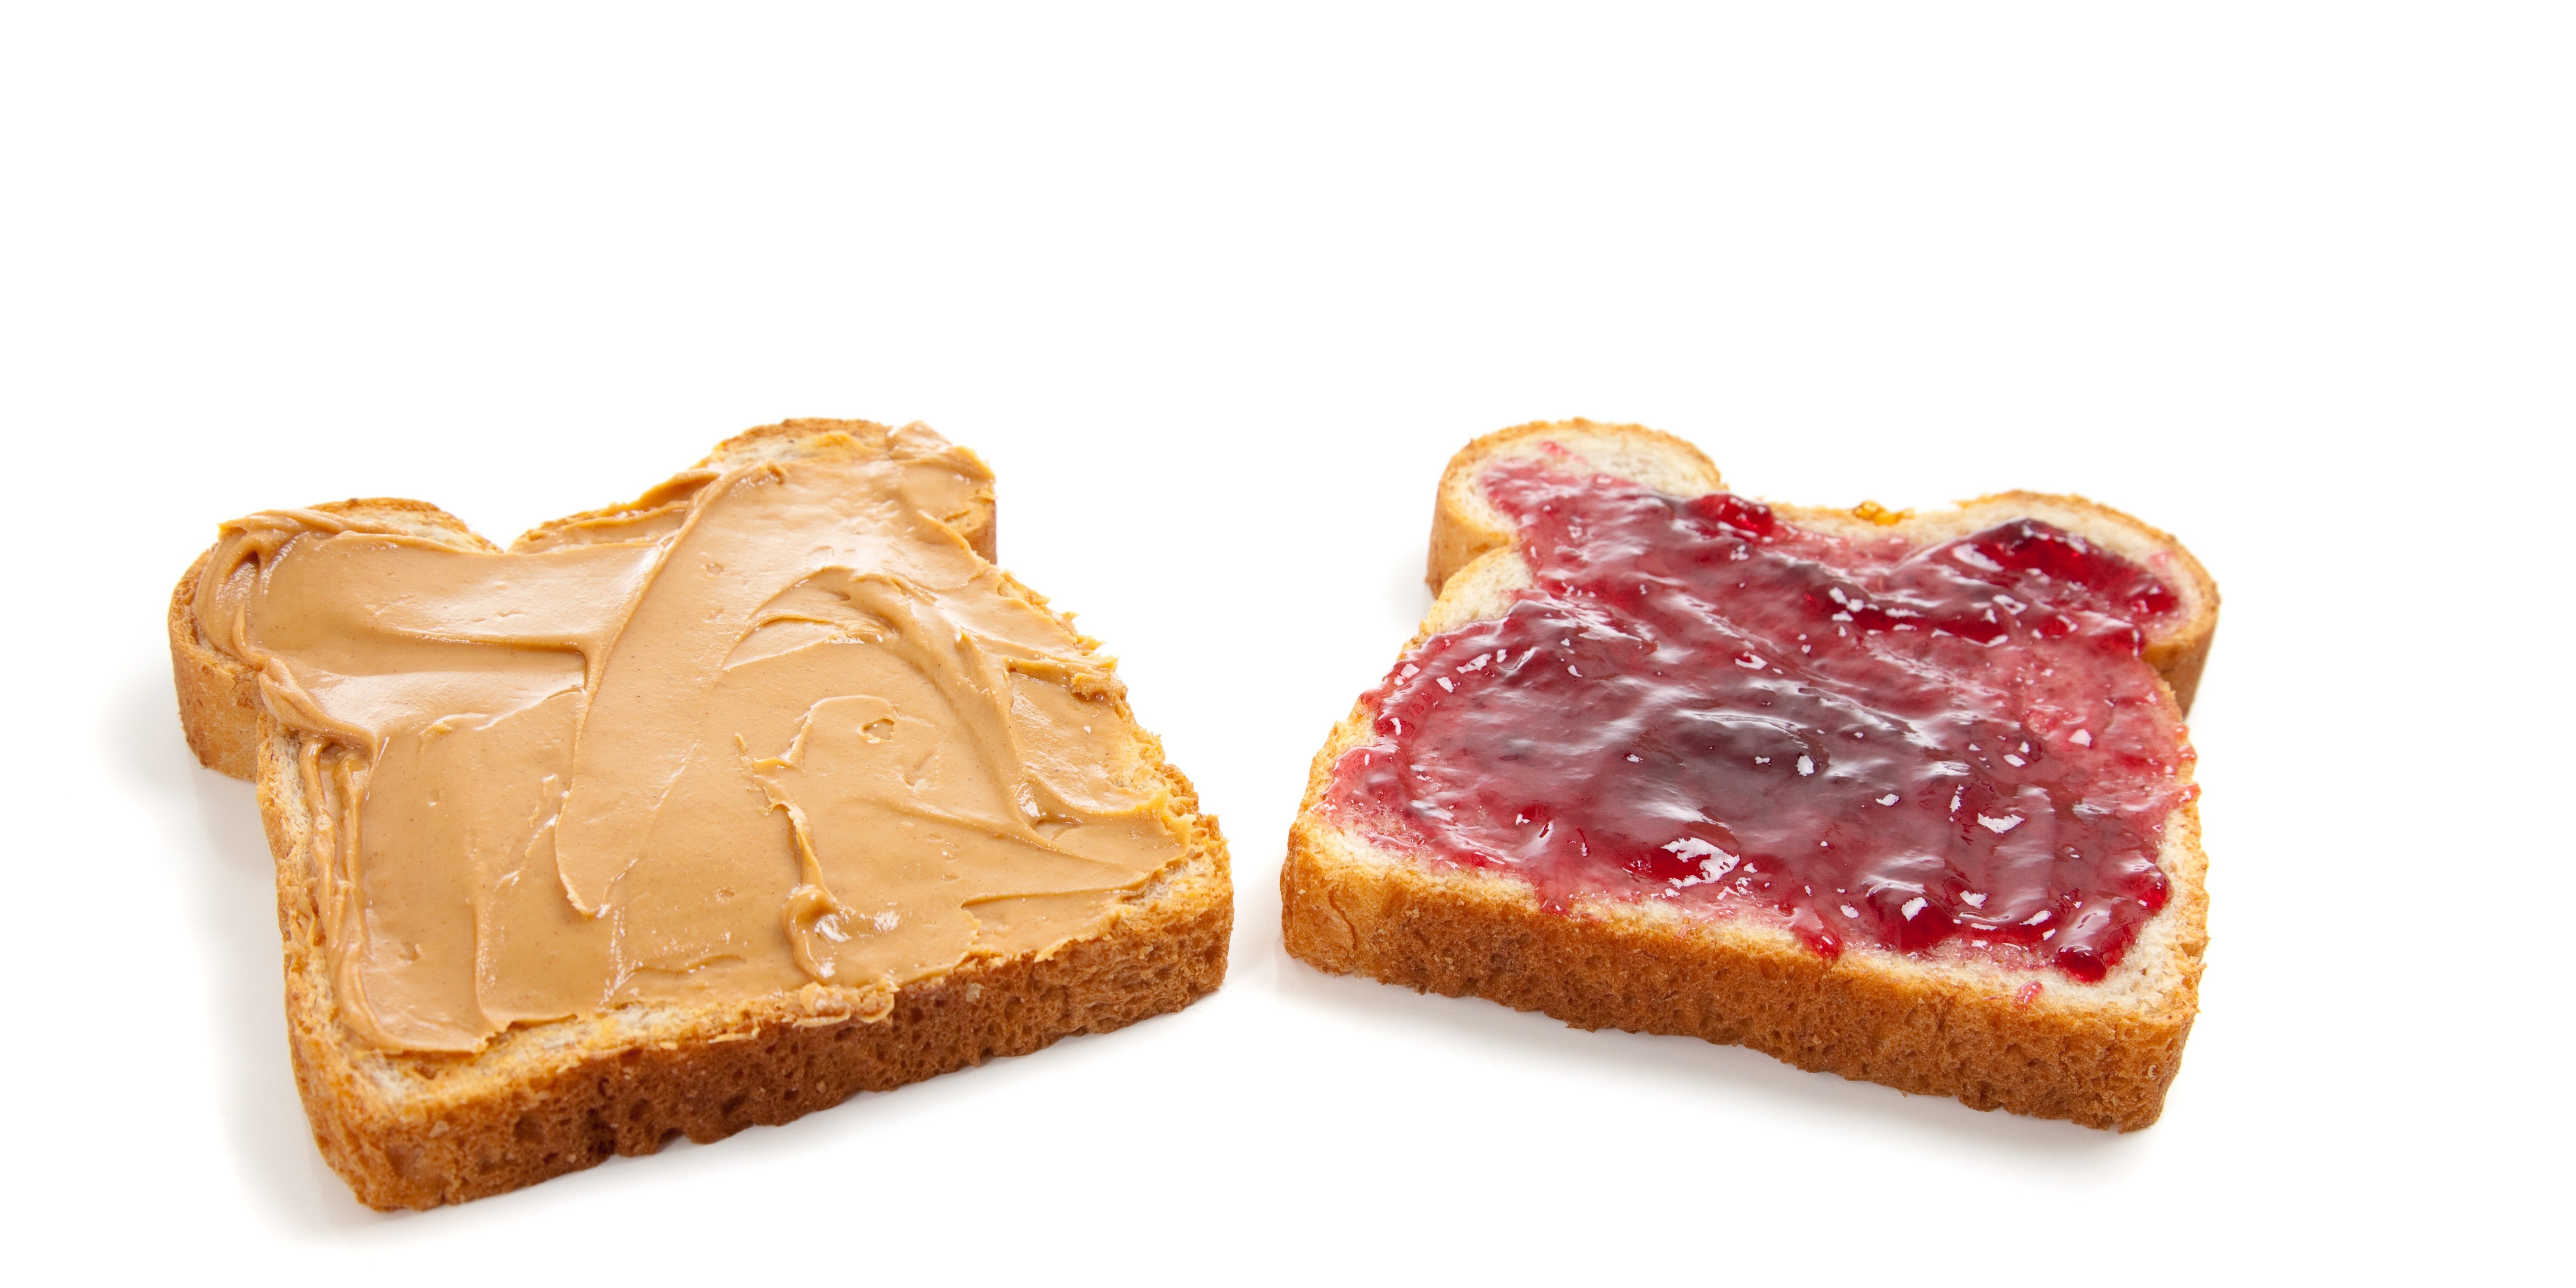 Inbound or Outbound? Why They Go Together Like Peanut Butter and Jelly